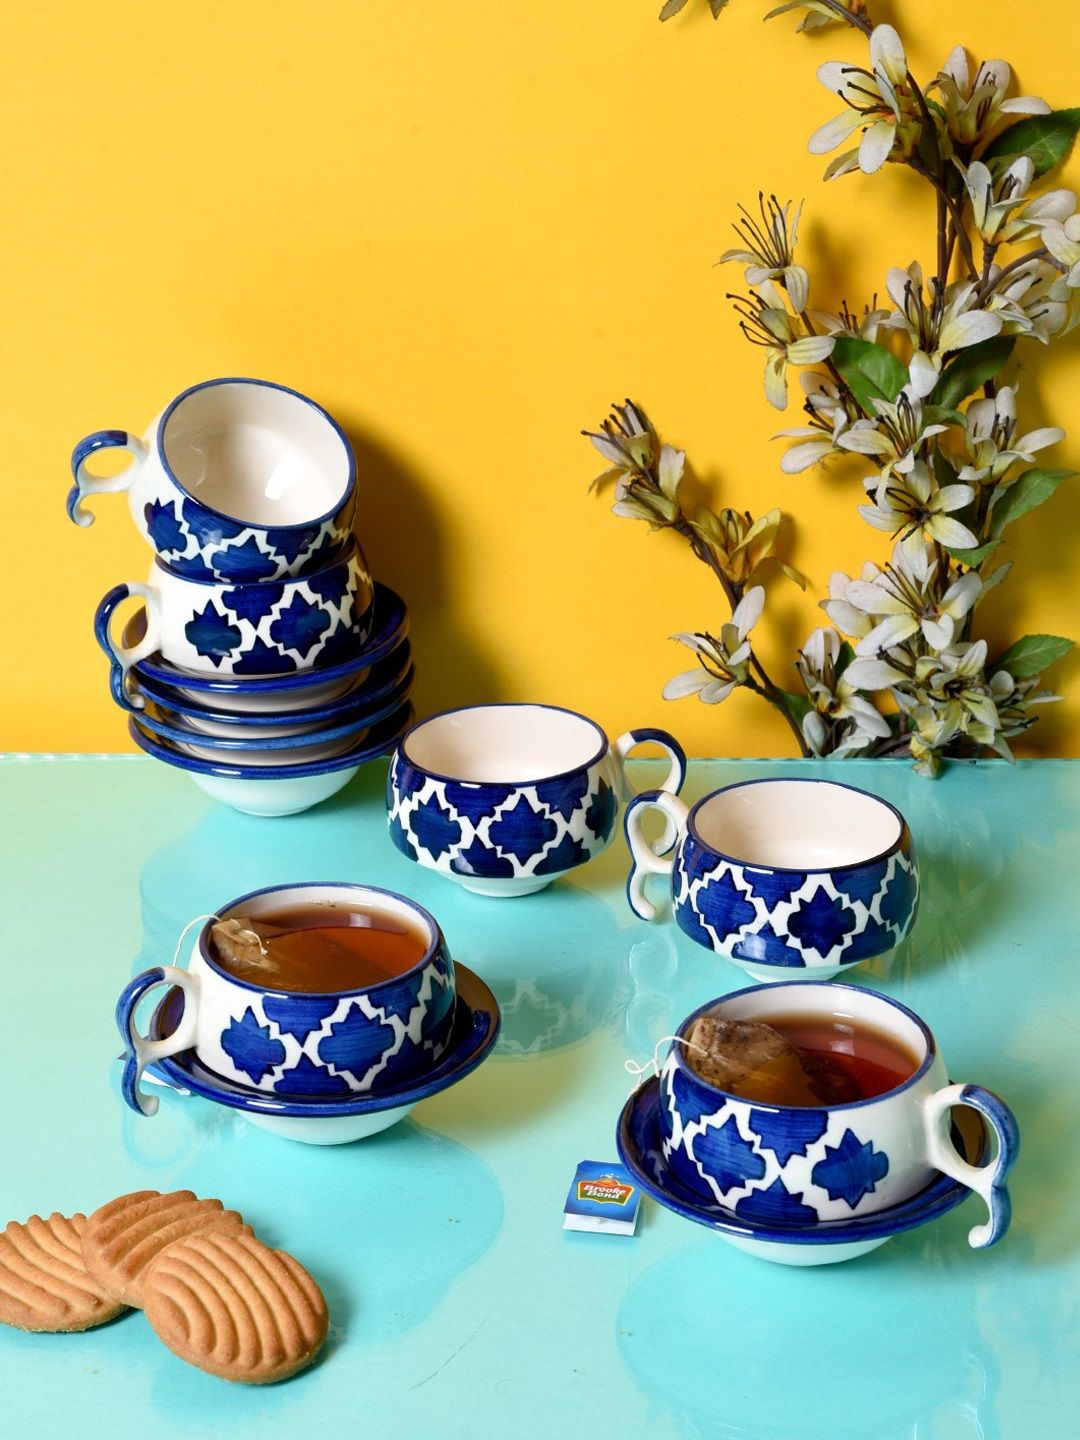 Unravel India Off-White & Blue Set of 6 Printed Ceramic Cups and Saucers Set Price in India